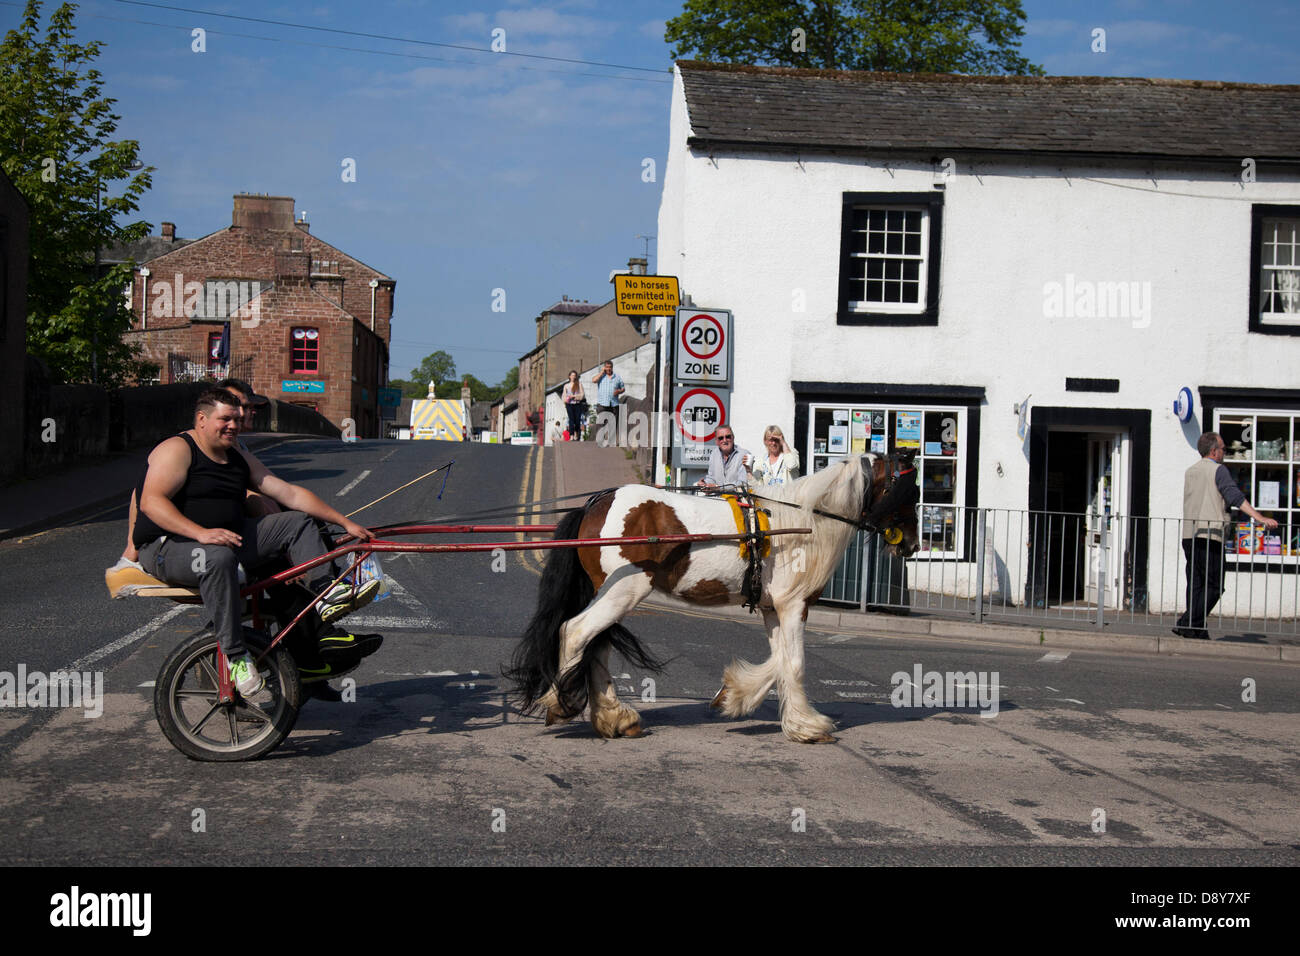 Appleby, Cumbria, Uk. 6th June, 2013.  Showing horses in the town centre at the Appleby Horse Fair in Cumbria.  The Fair is an annual gathering of Gypsies and Travellers which takes place on the first week in June, and has taken place since the reign of James II, who granted a Royal charter in 1685 allowing a horse fair 'near to the River Eden'. Stock Photo